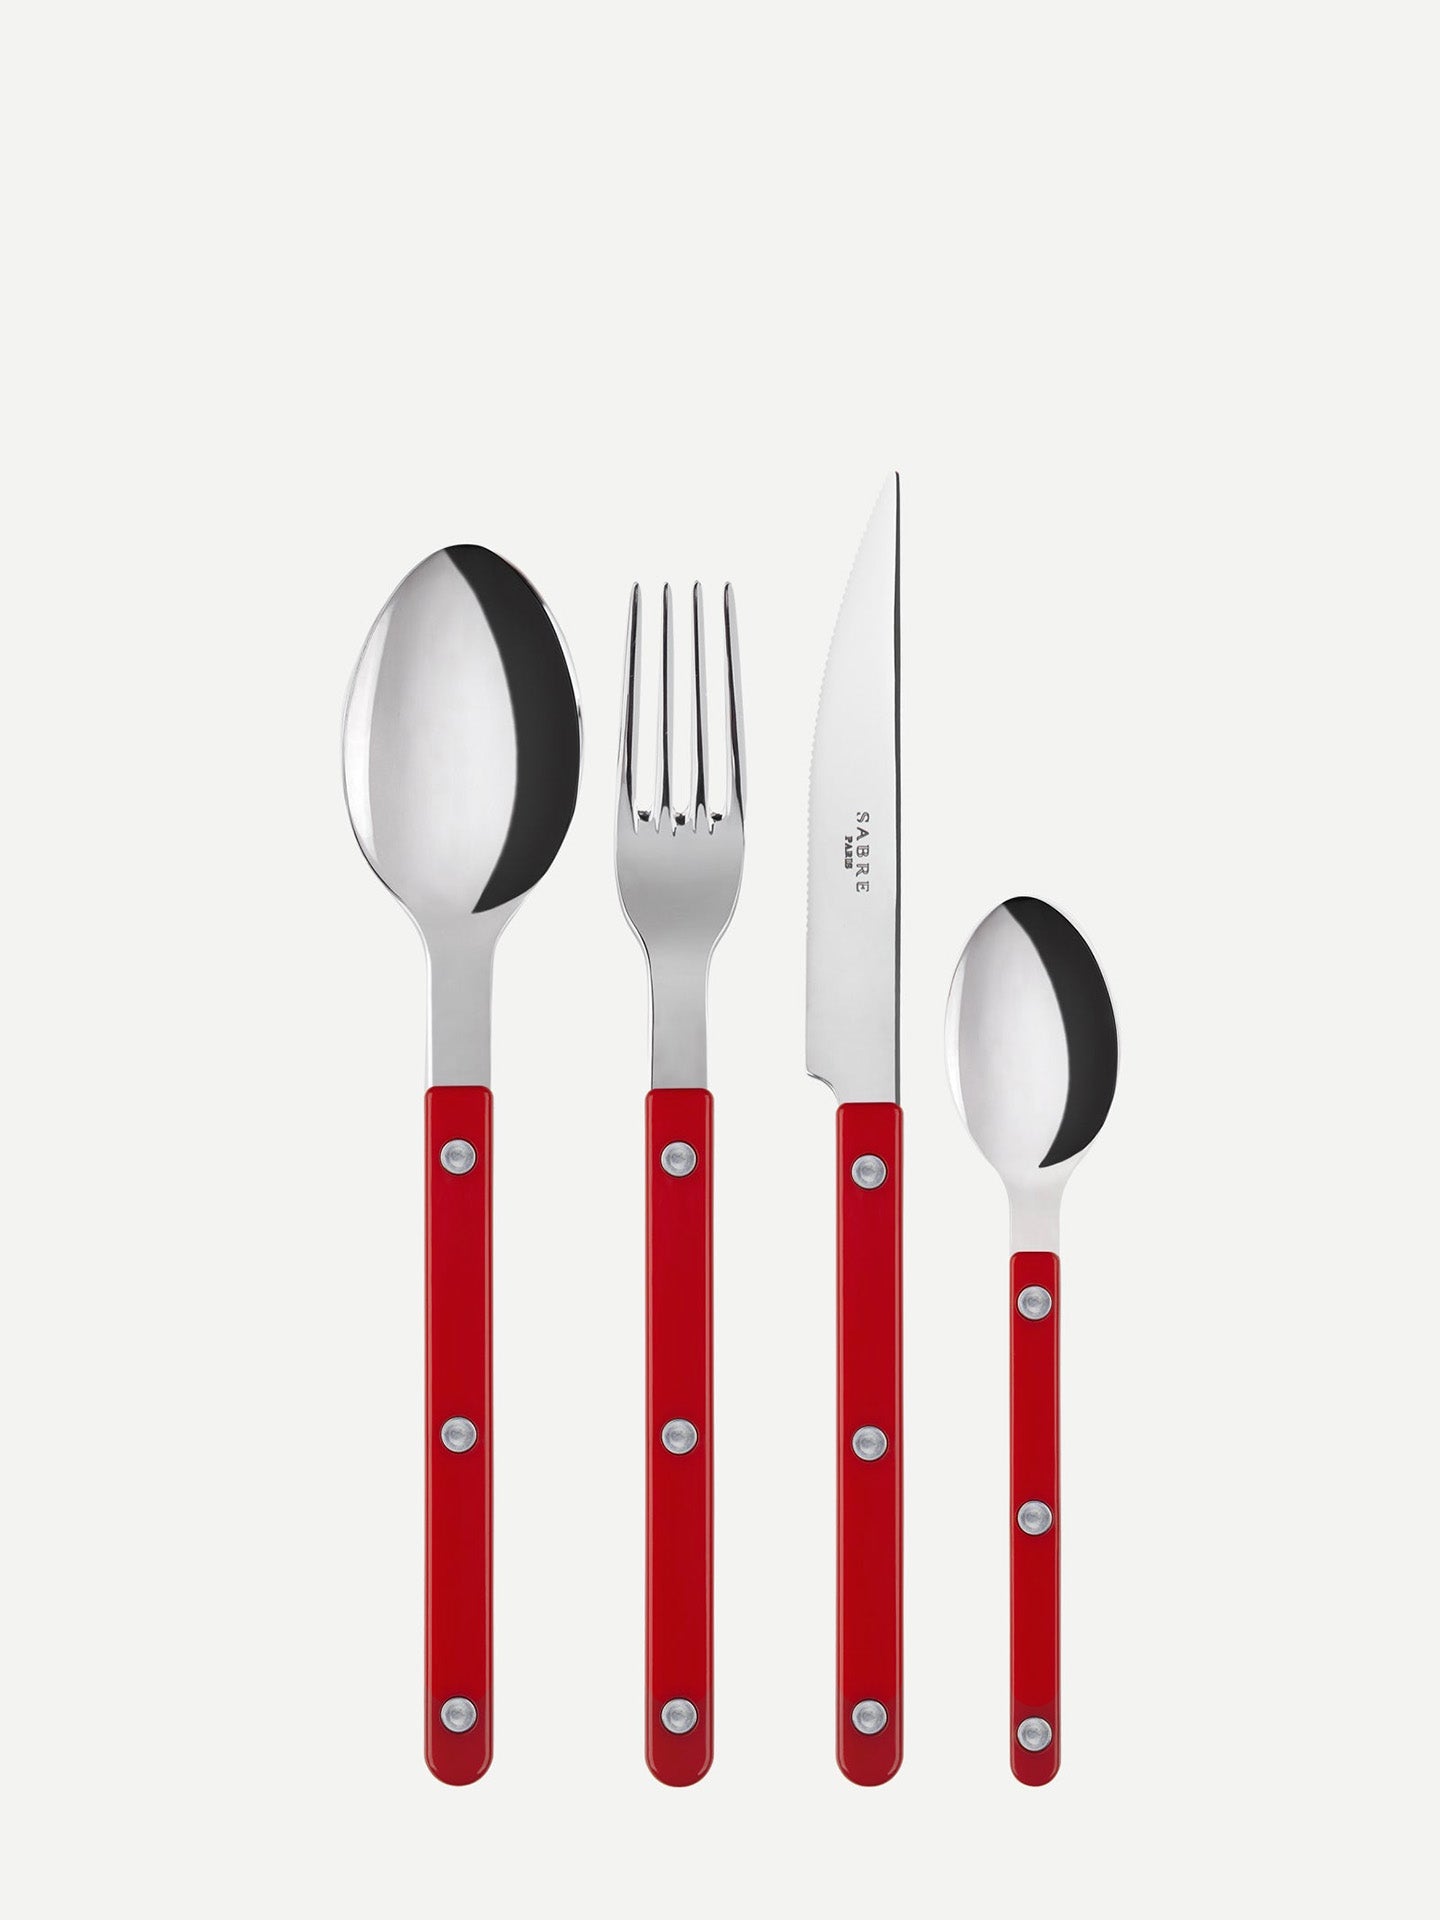 The little red Bistrot spoon couples great with the tablespoon, dinner fork and the dinner knife of the same colour. But it's possible to mix them with other shades, too, as the cutleries are available to buy in single pieces - think red with garden green, lapis blue, ivory or the faux tortoise patterned Bistrot cutleries!